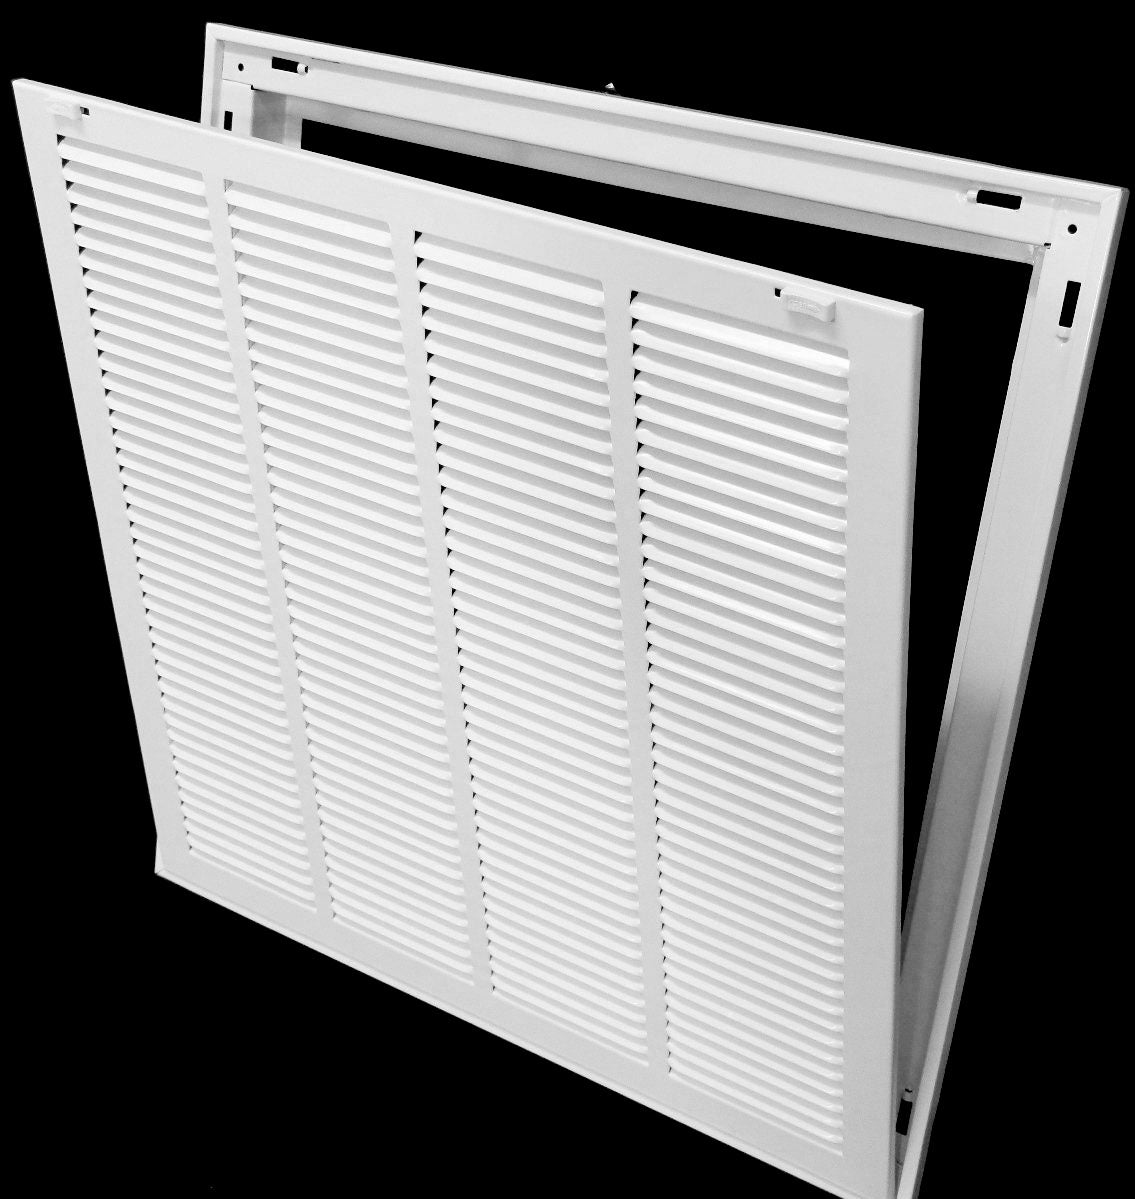 24&quot; X 12&quot; Steel Return Air Filter Grille for 1&quot; Filter - Removable Frame - [Outer Dimensions: 26 5/8&quot; X 14 5/8&quot;]